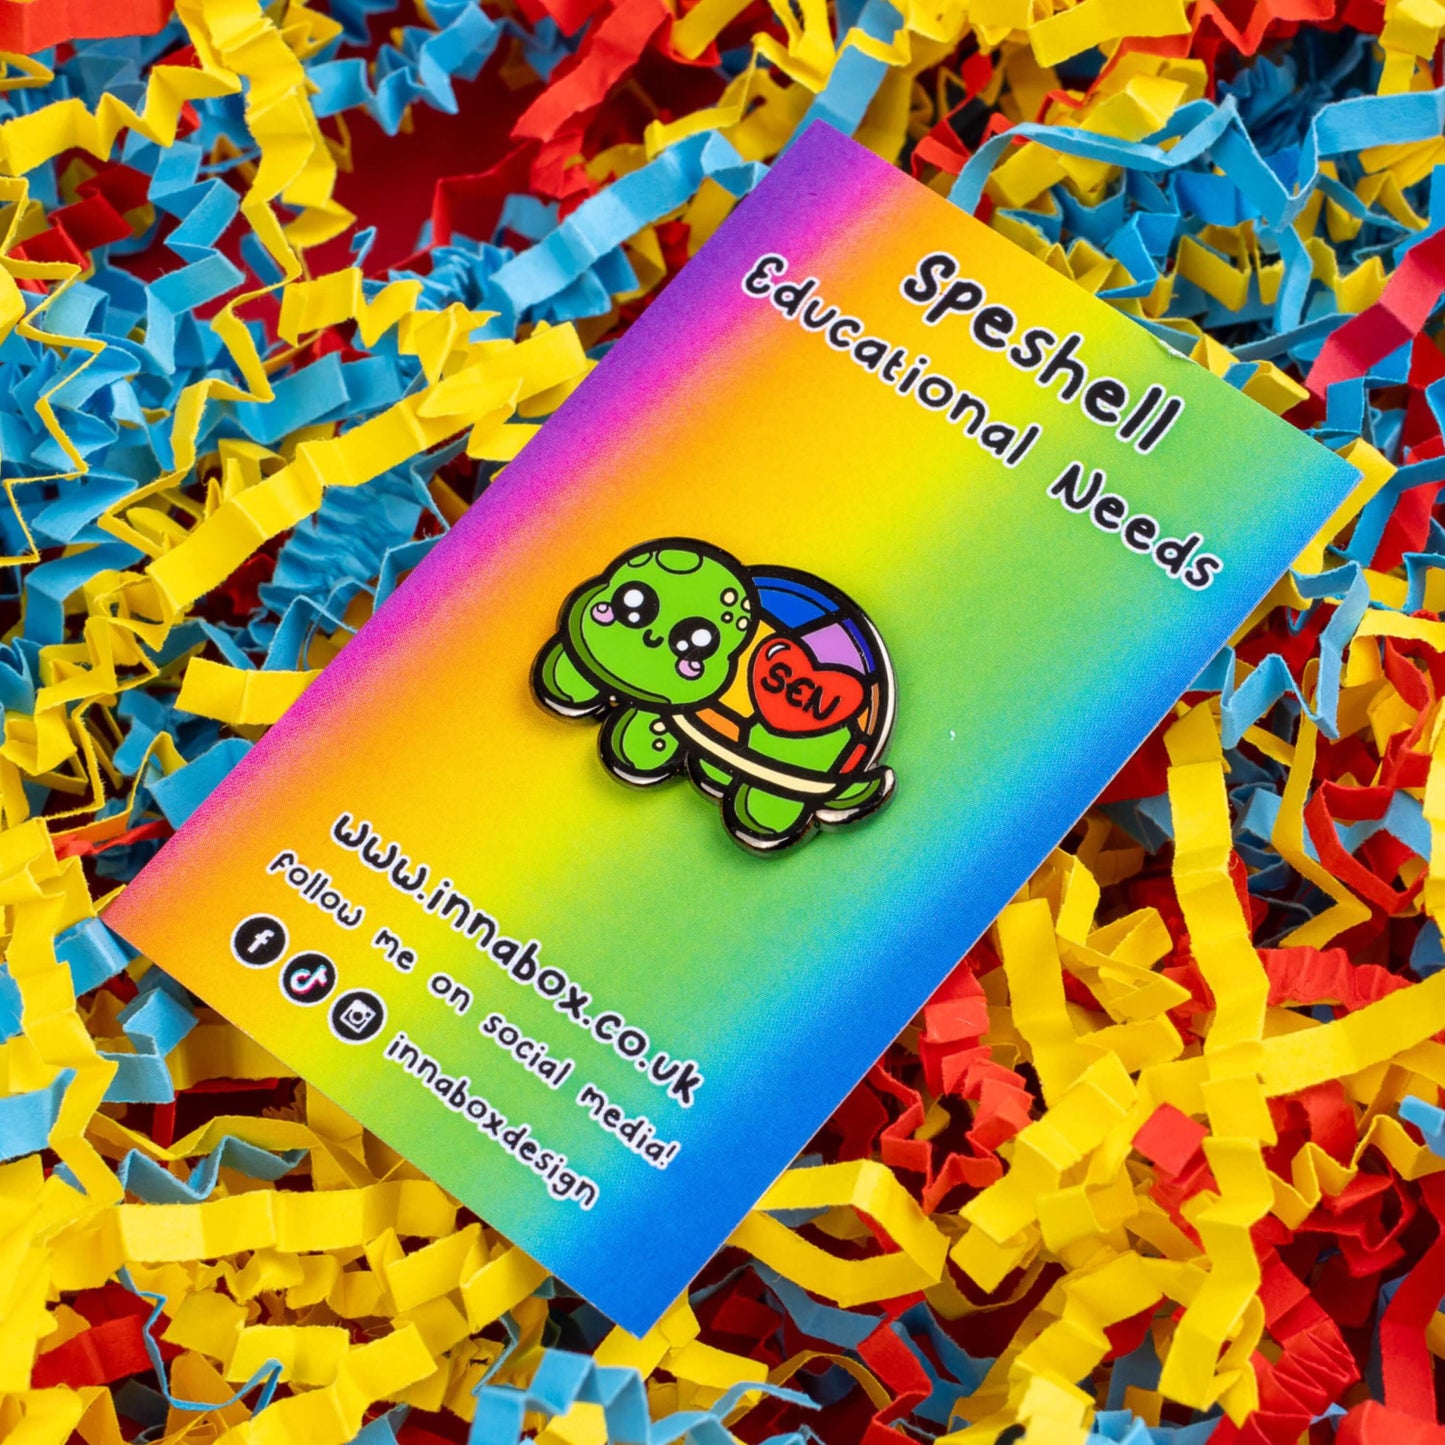 The Speshell Educational Needs Enamel Pin - SEN - Special Educational Needs on a rainbow backing card laid on a red, yellow and blue card confetti background. A rainbow shell kawaii cute style tortoise with pink cheeks and sparkling eyes, on its shell is a red heart with 'SEN' in the middle. The pin design is raising awareness for SEN Special Educational Needs.